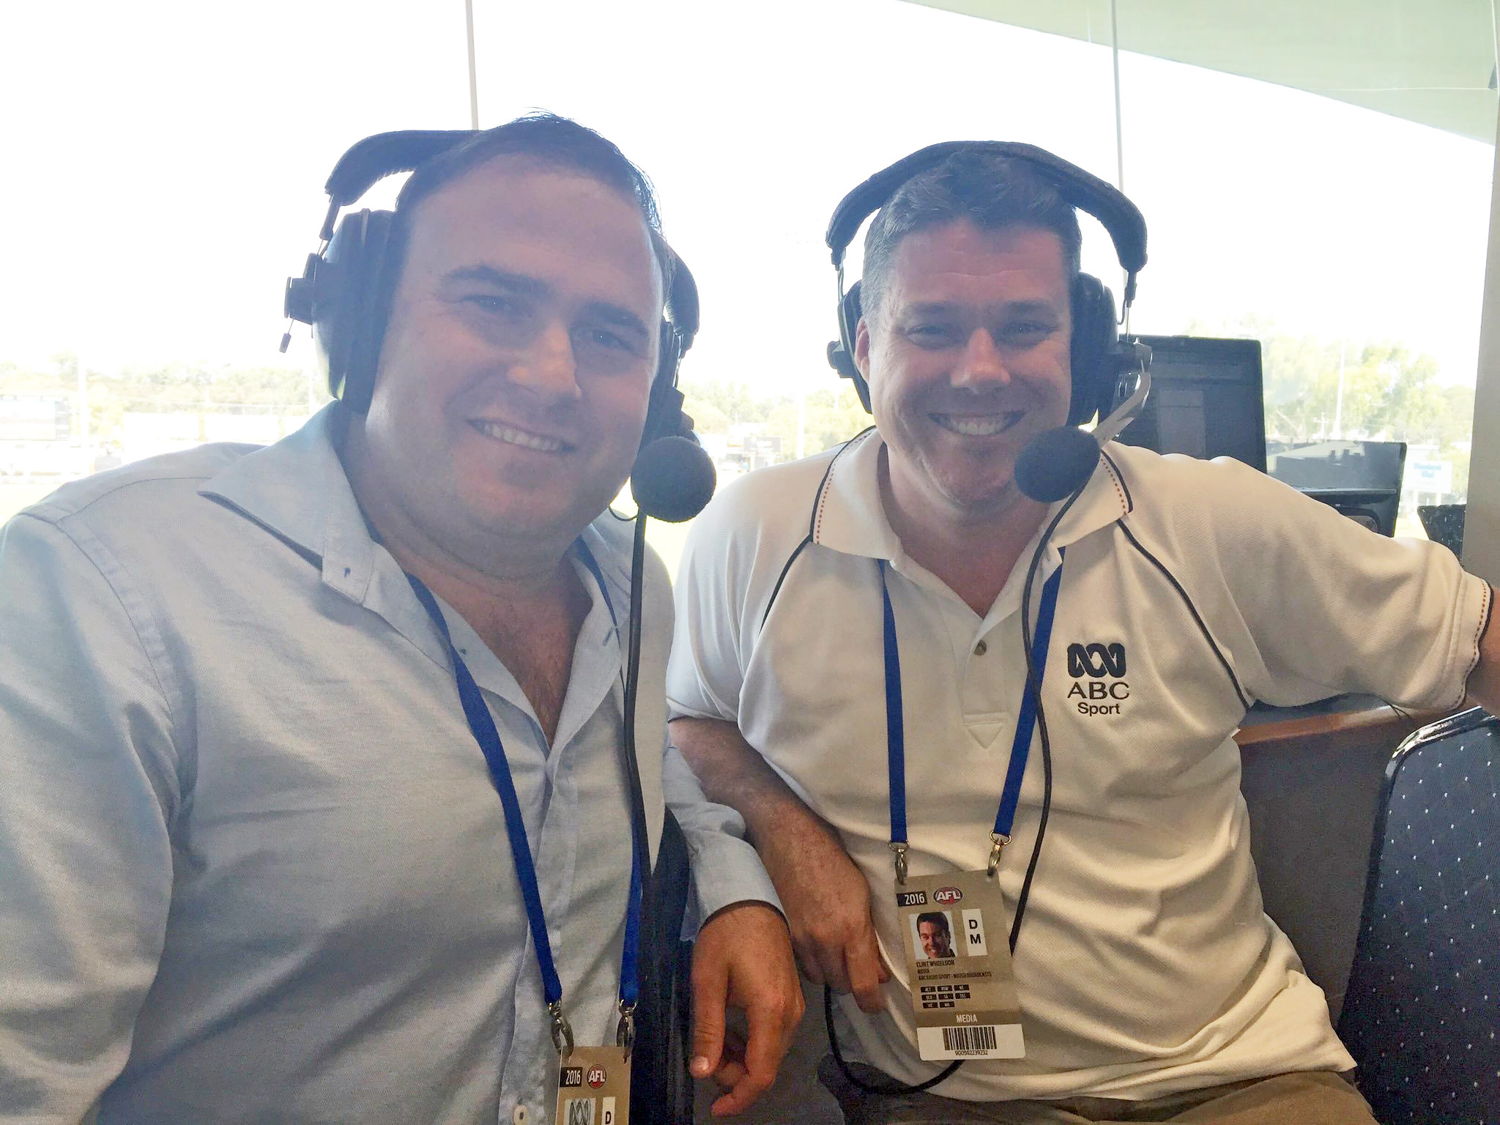 Four-time Ross Glendinning Medal winner Paul Hasleby in the Grandstand commentary booth with the ABC's Clint Wheeldon.